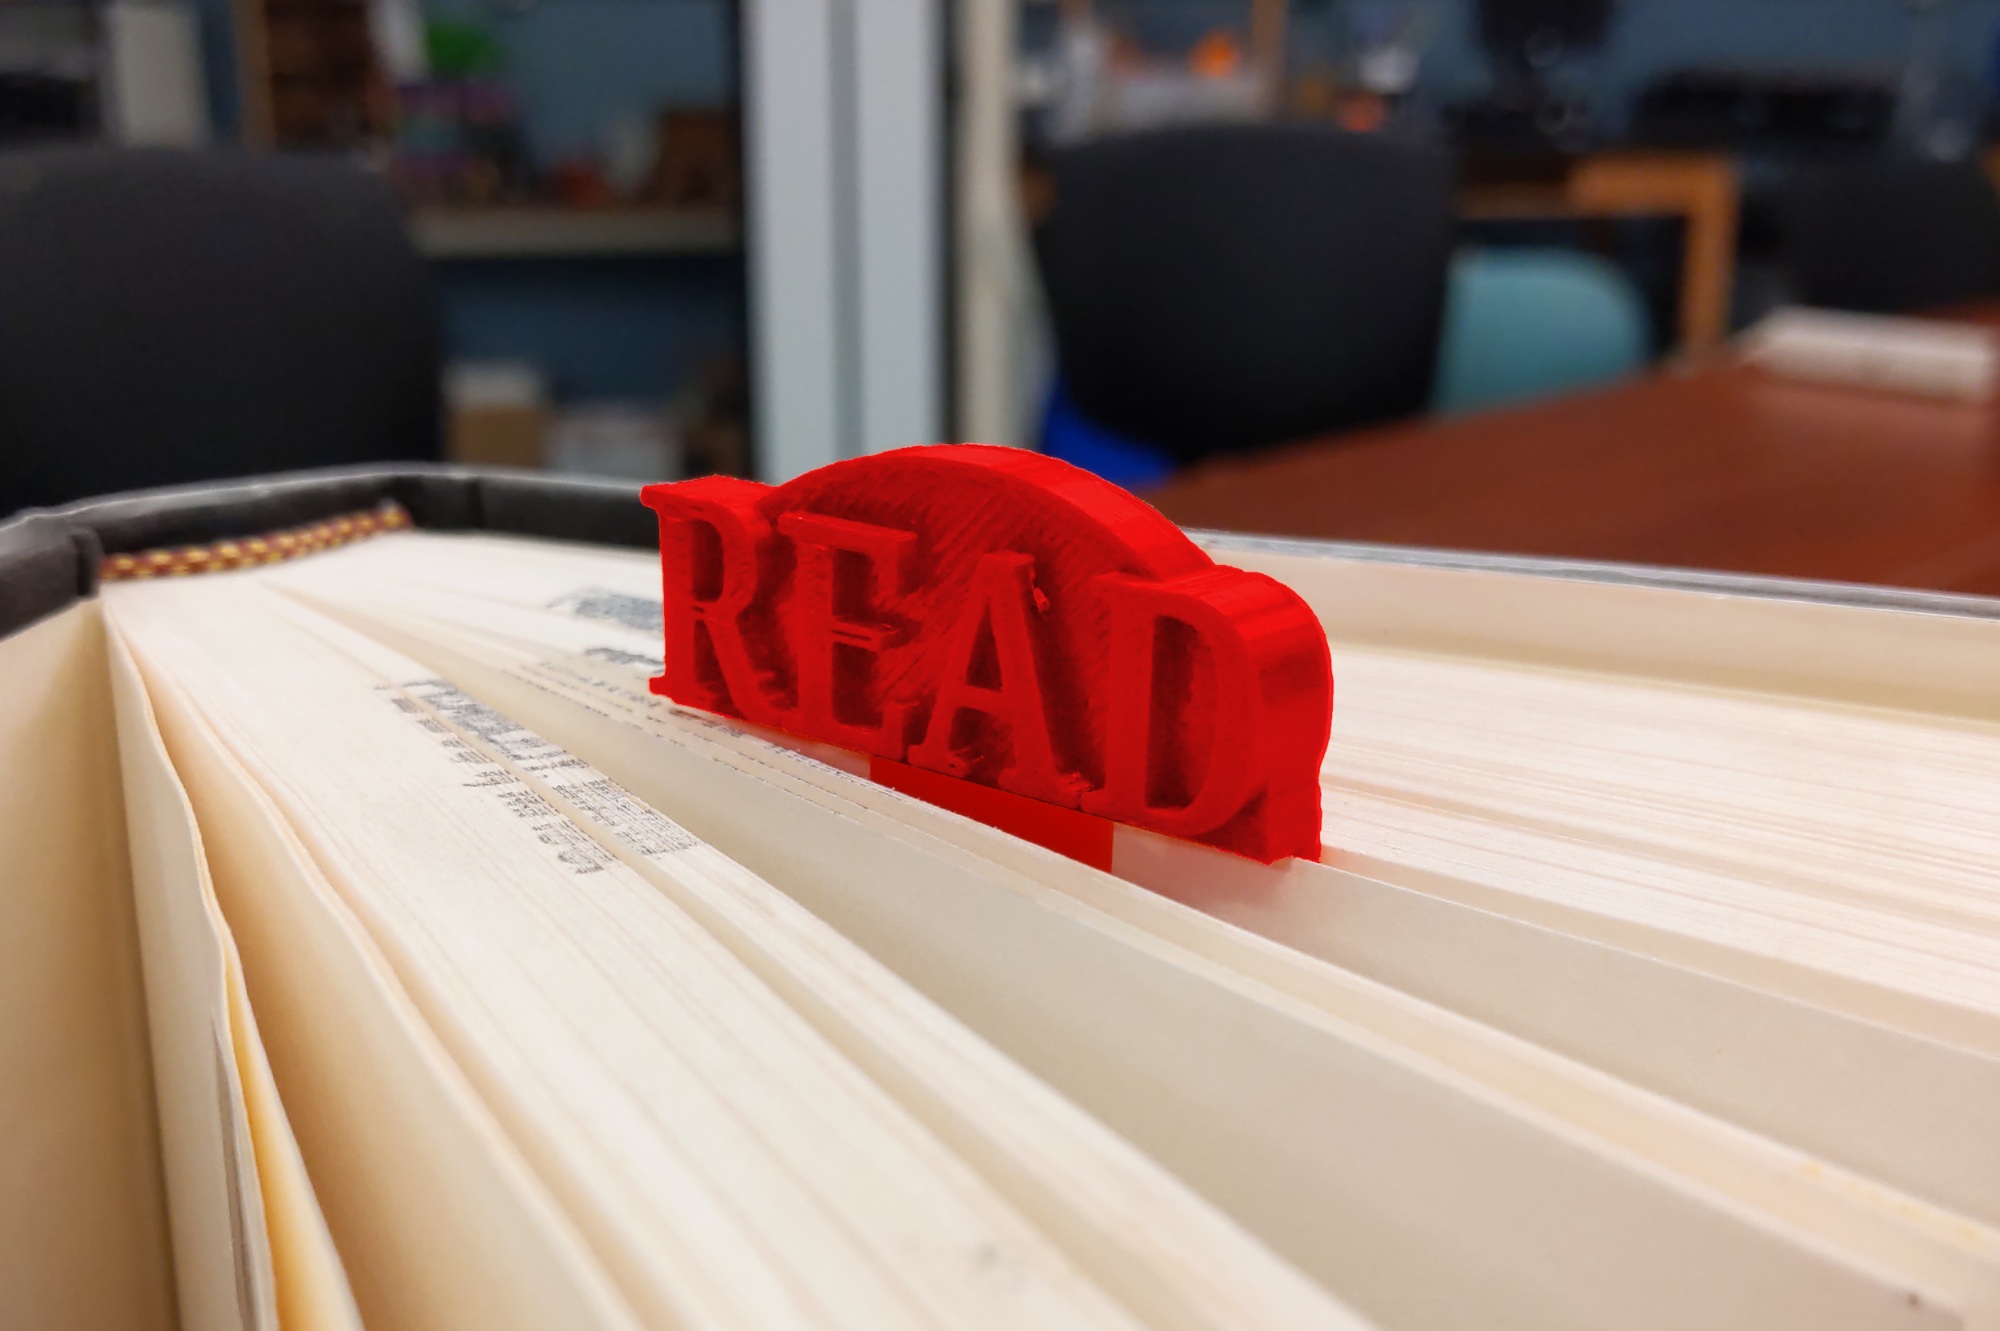 3D-printed bookmark with the word "READ" embossed on it, clipped onto a page of a book